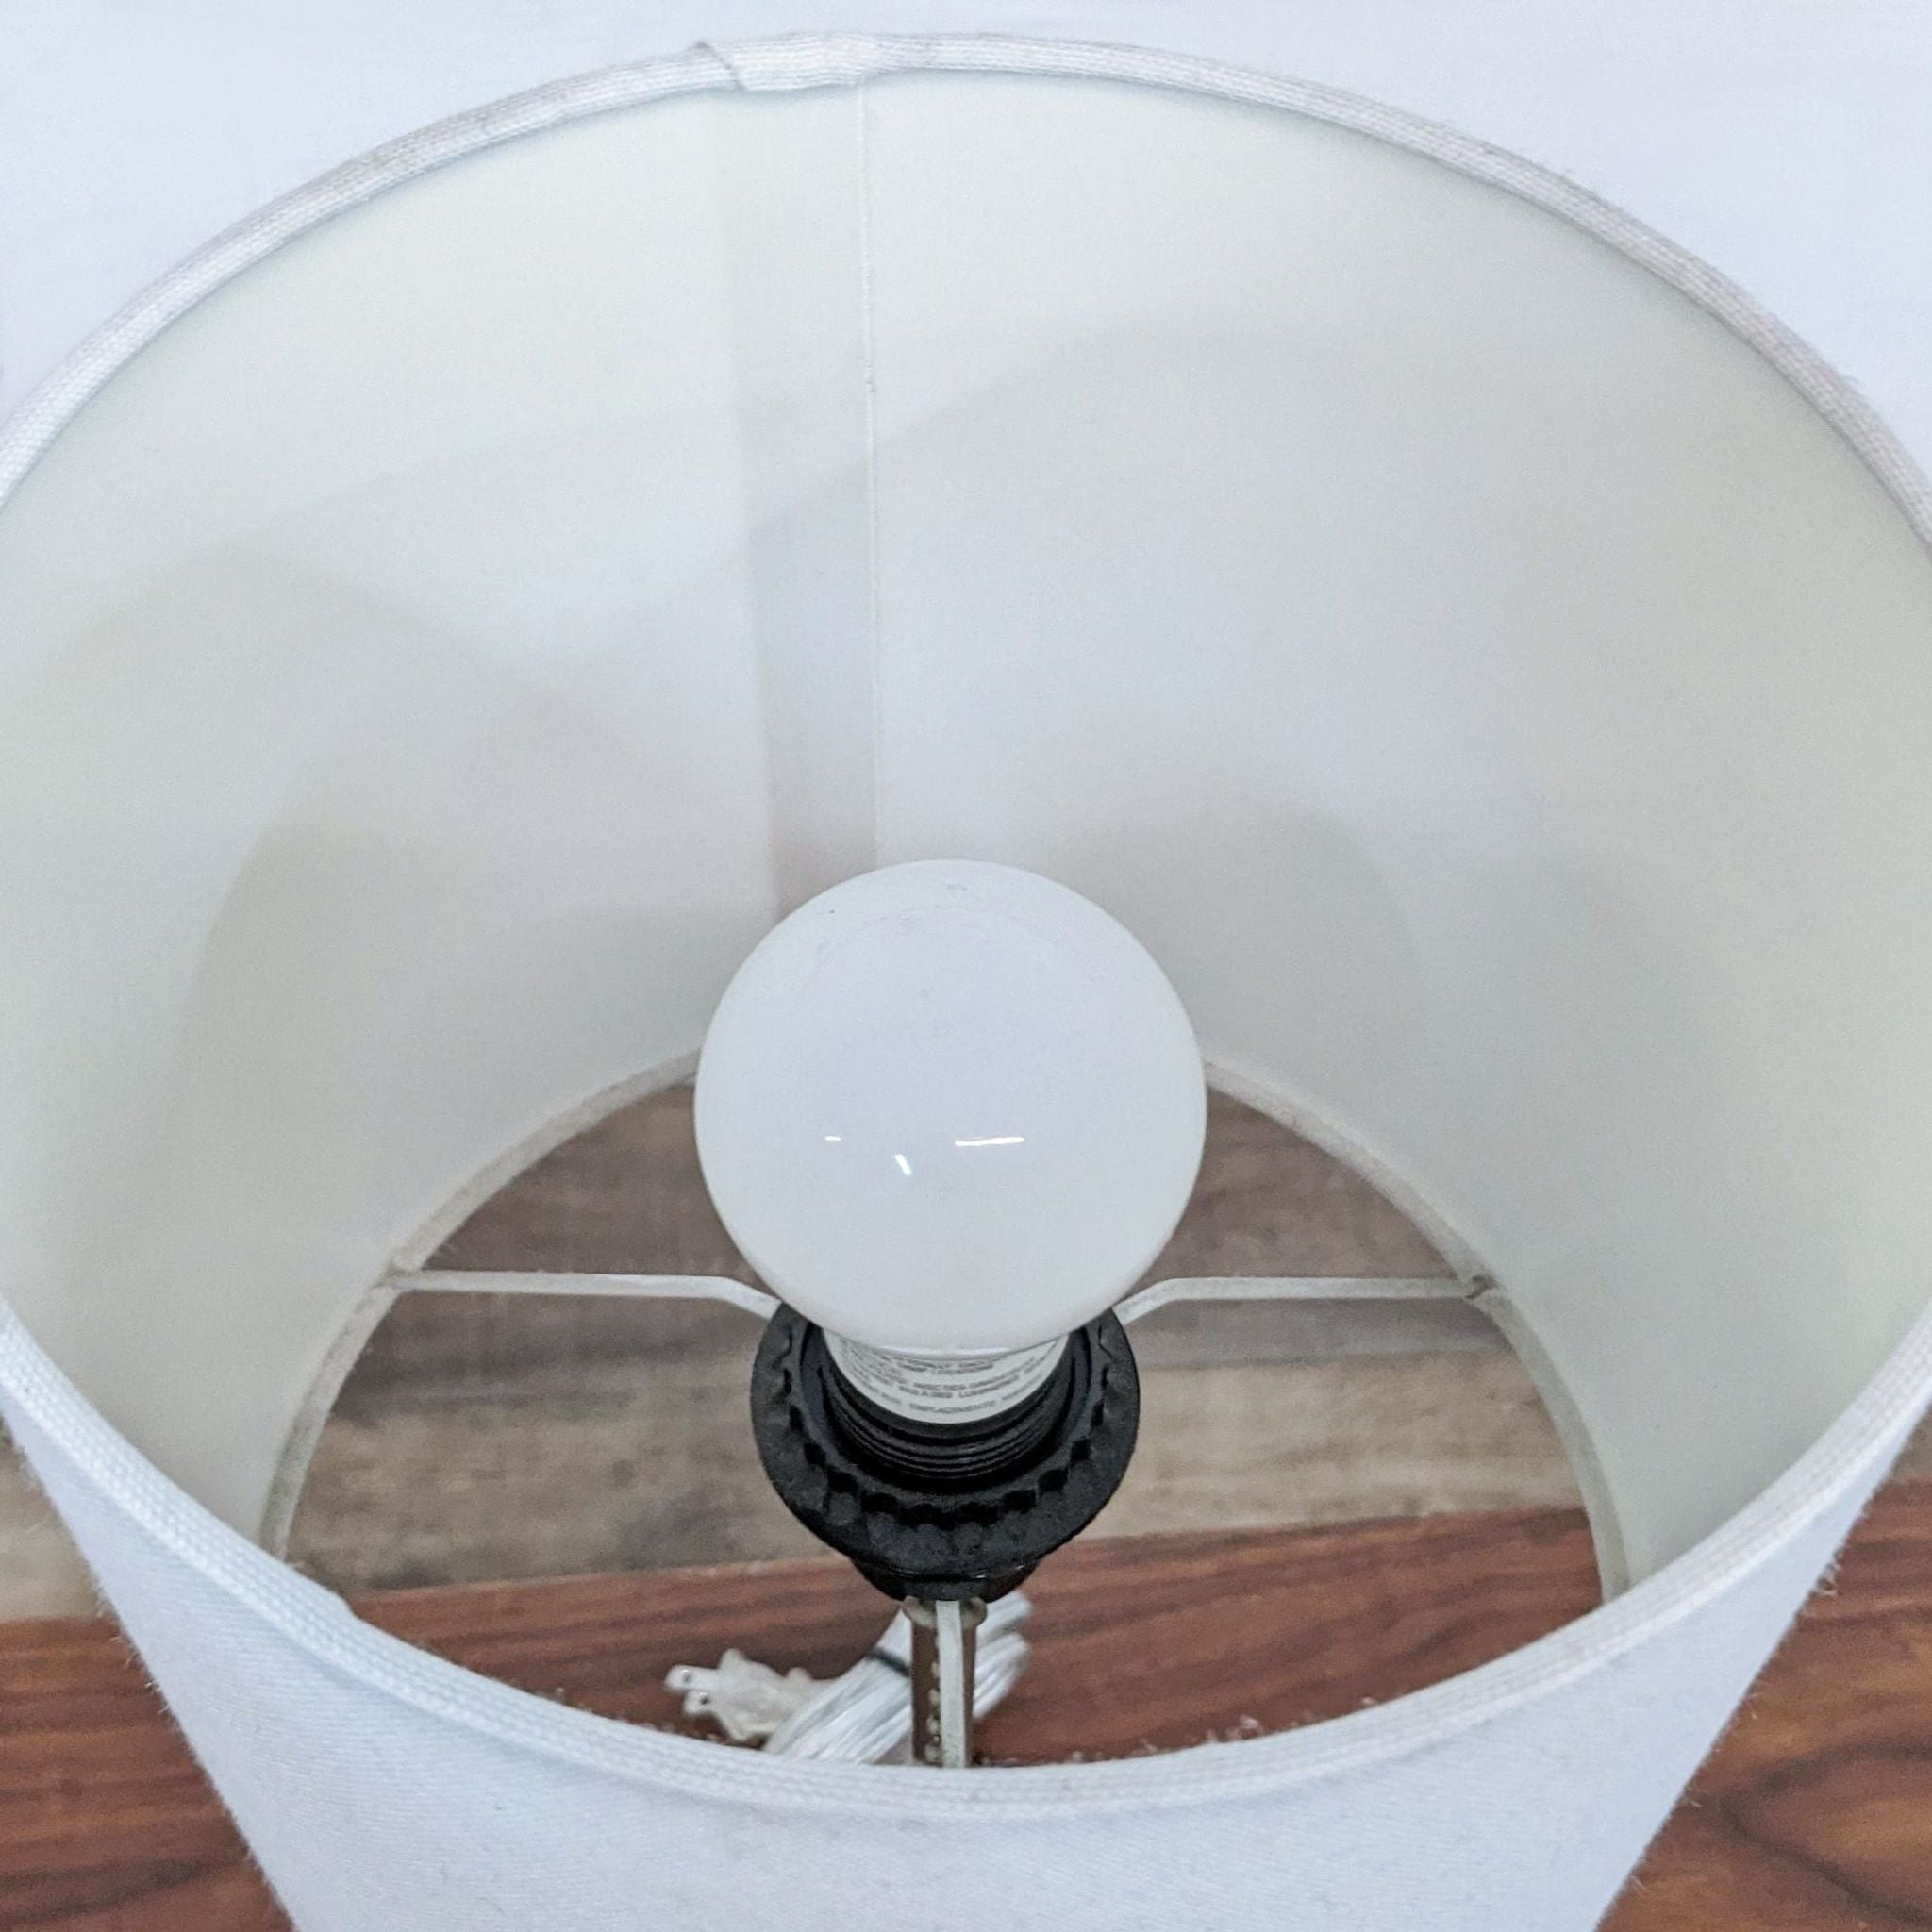 Alt text 2: Close-up view of a simple white Reperch lampshade and light bulb, revealing interior structure and details. Max length 100.